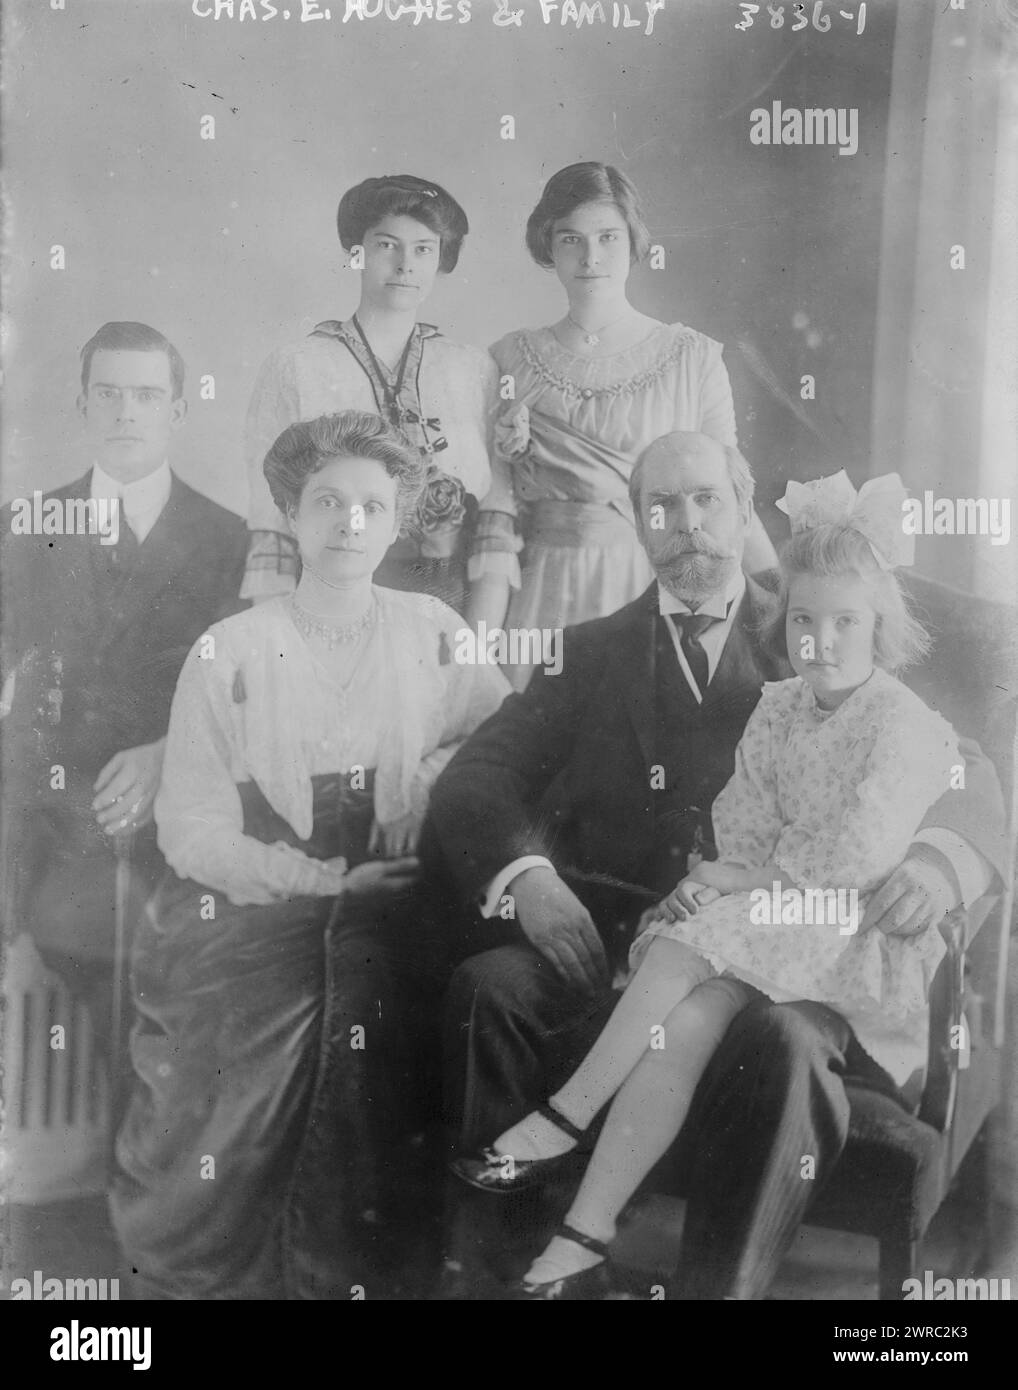 Chas. E. Hughes and Family, Photograph shows Charles Evans Hughes (1862-1948) with his family. Included are his wife Antoinette Carter Hughes and children: Charles, Jr.; Helen, Catherine and Elizabeth., between ca. 1915 and ca. 1920, Glass negatives, 1 negative: glass Stock Photo